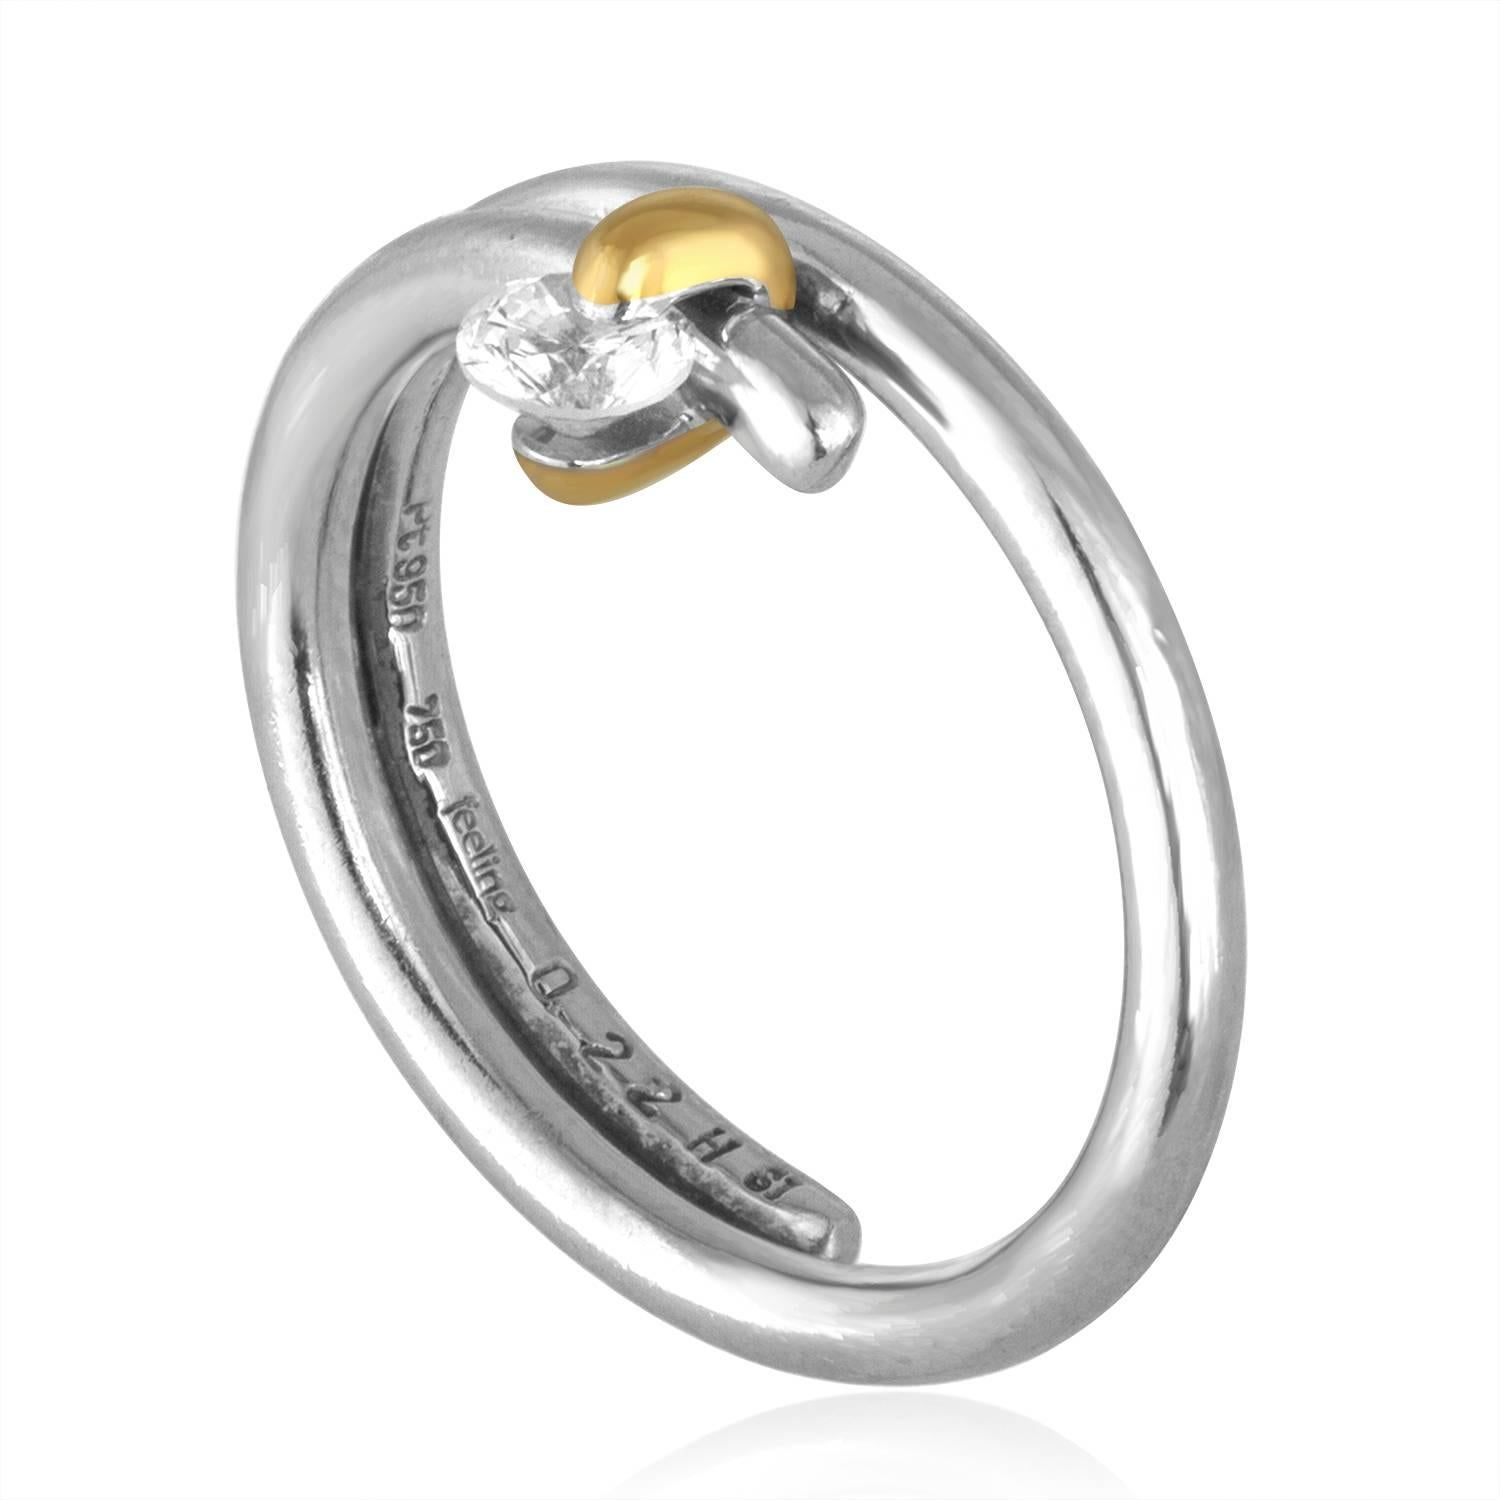 Creative Diamond Ring signed Feeling.
The ring is Platinum and 18K Yellow Gold.
The Diamond is 0.22Ct H SI1.
The ring is size 6.5, not sizable.
The ring weighs 6 grams.
